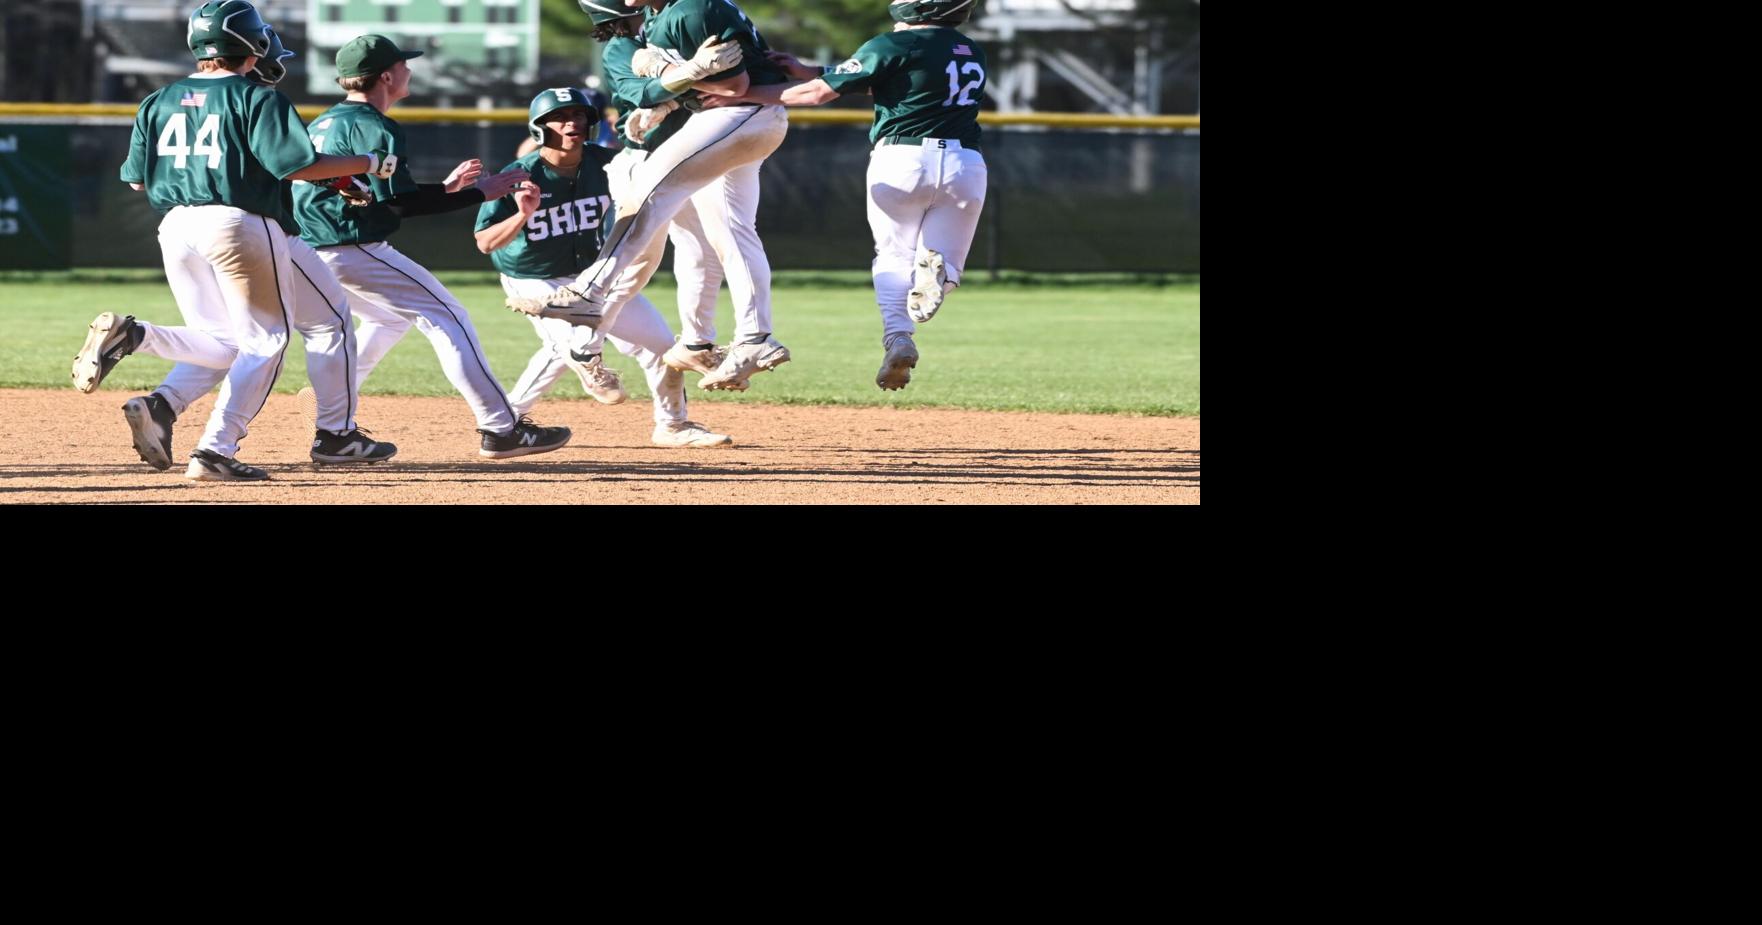 Brad Curtis’s Second Walk-off RBI Single Propels Shenendehowa to 2-1 Victory Over Saratoga Springs